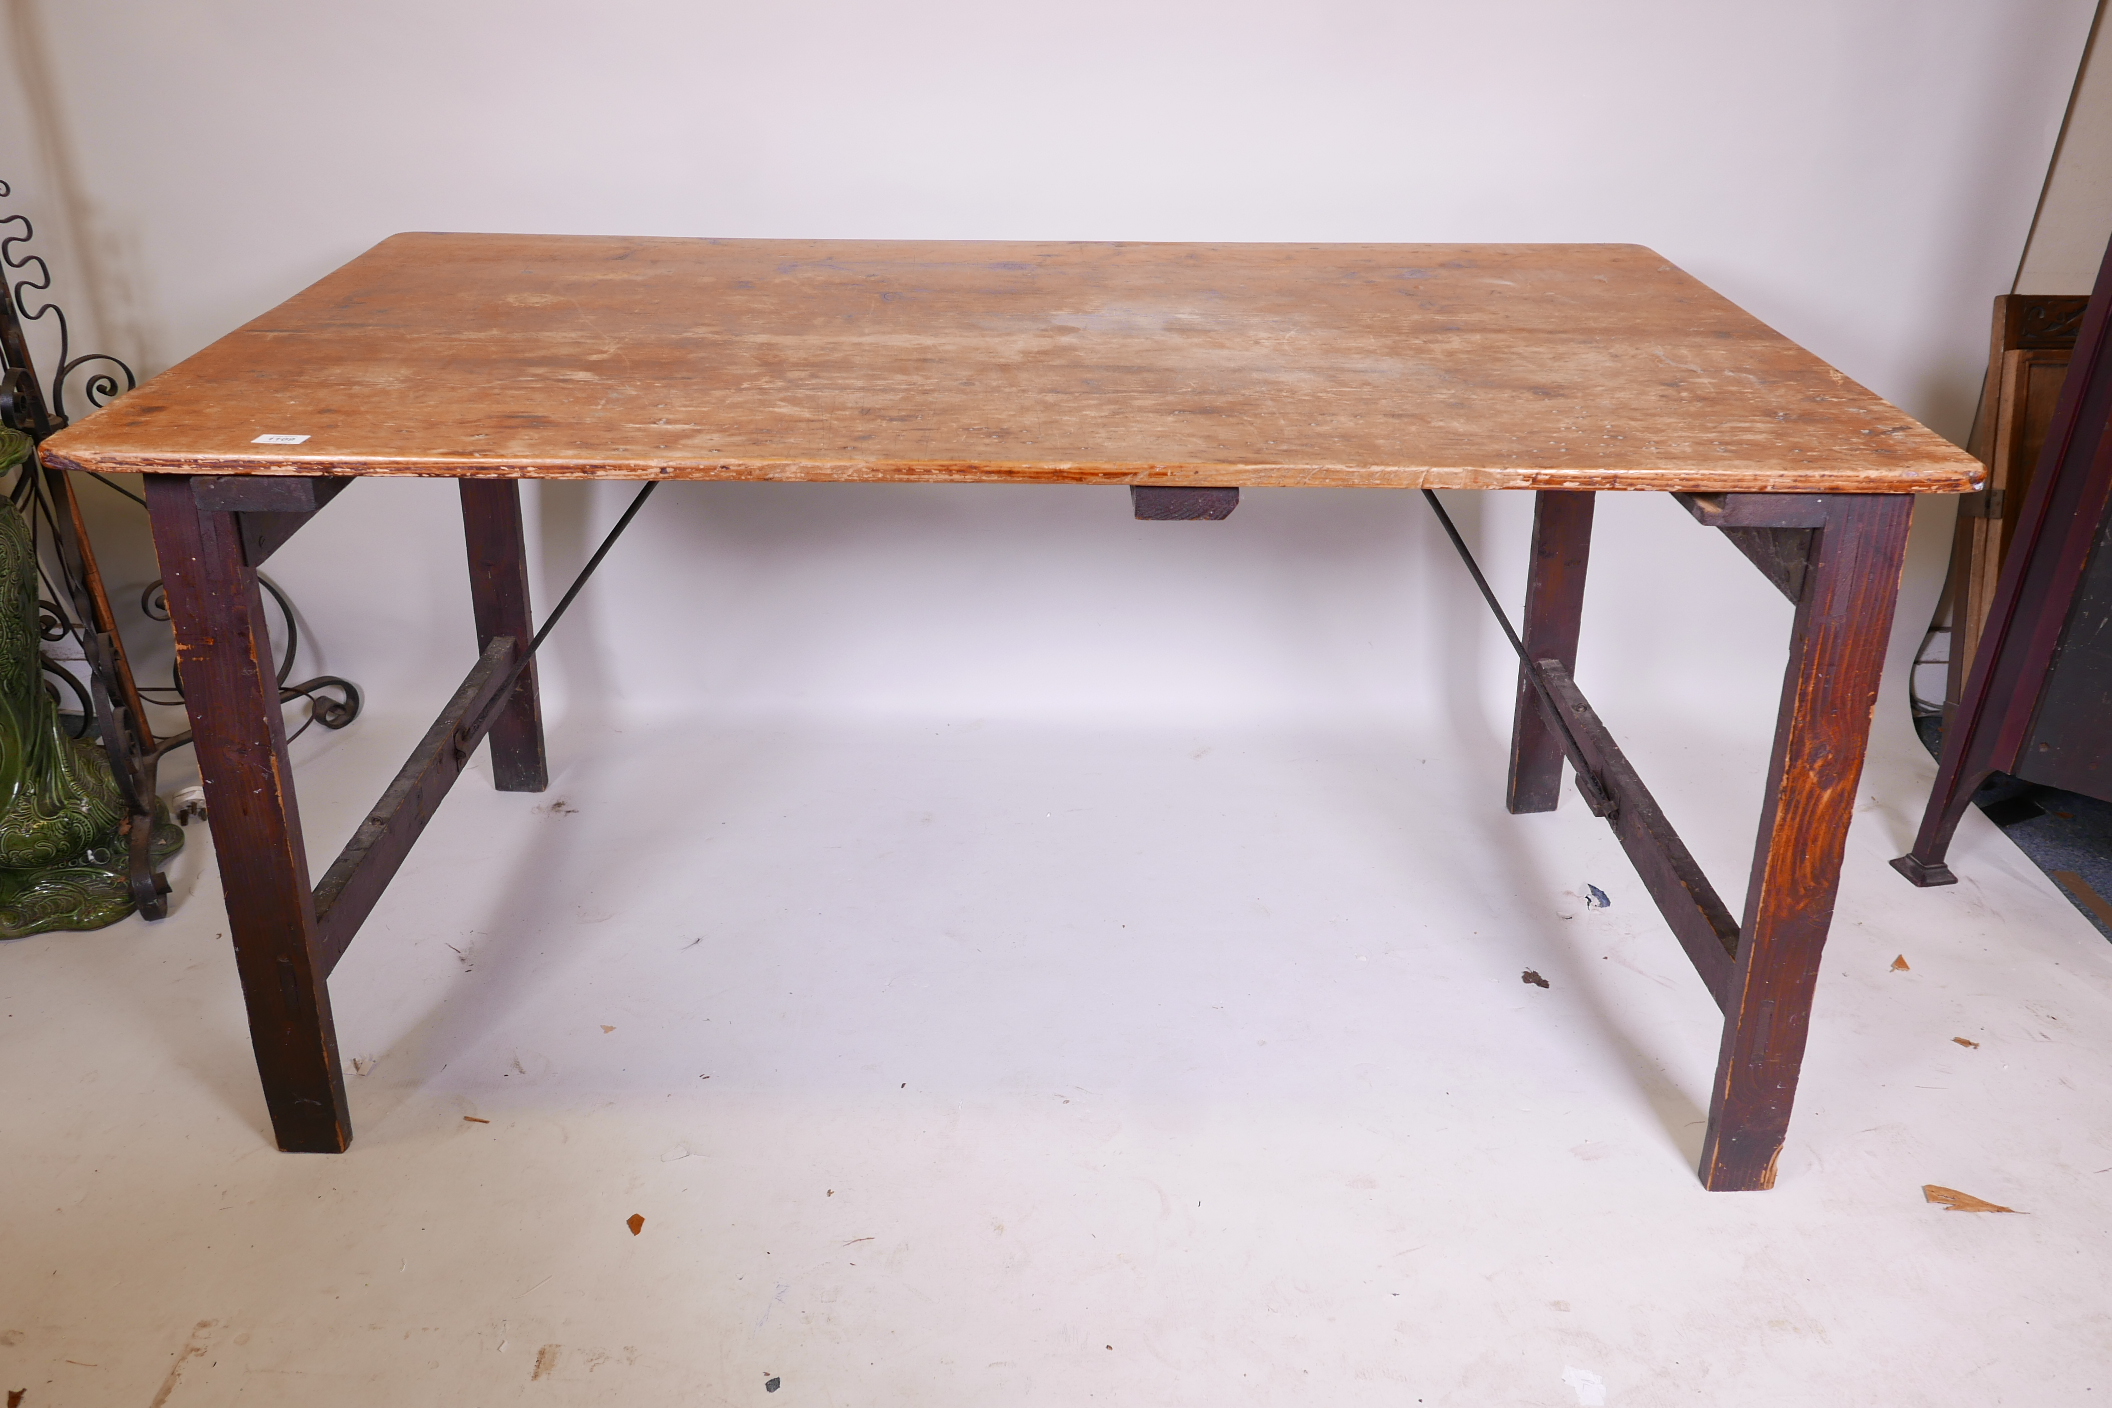 An antique pine trestle table with plank top, 60" x 32" x 30"